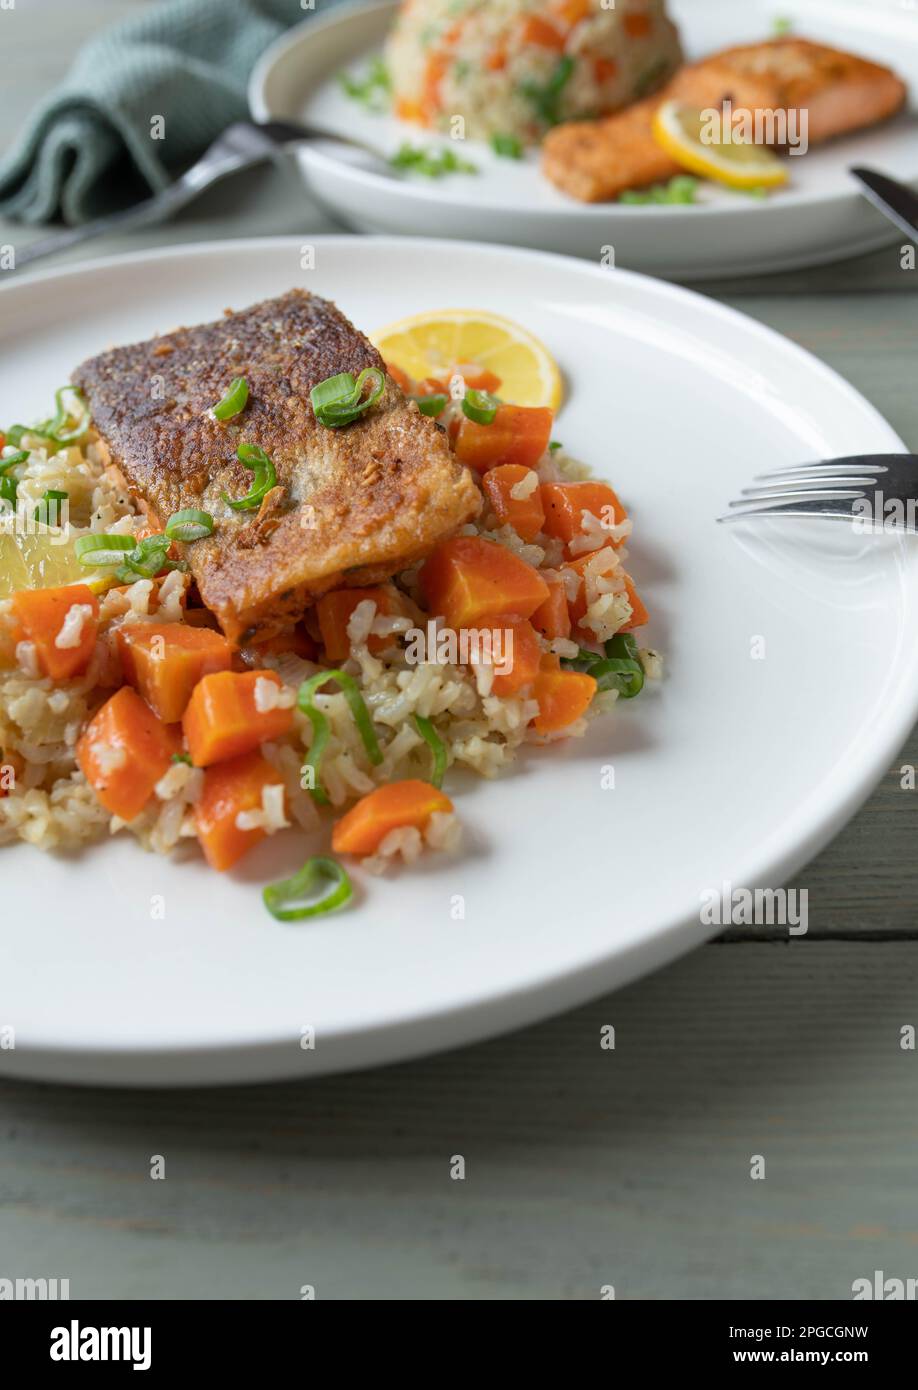 Healthy fish dish with pan fried salmon, brown rice and vegetables. Stock Photo